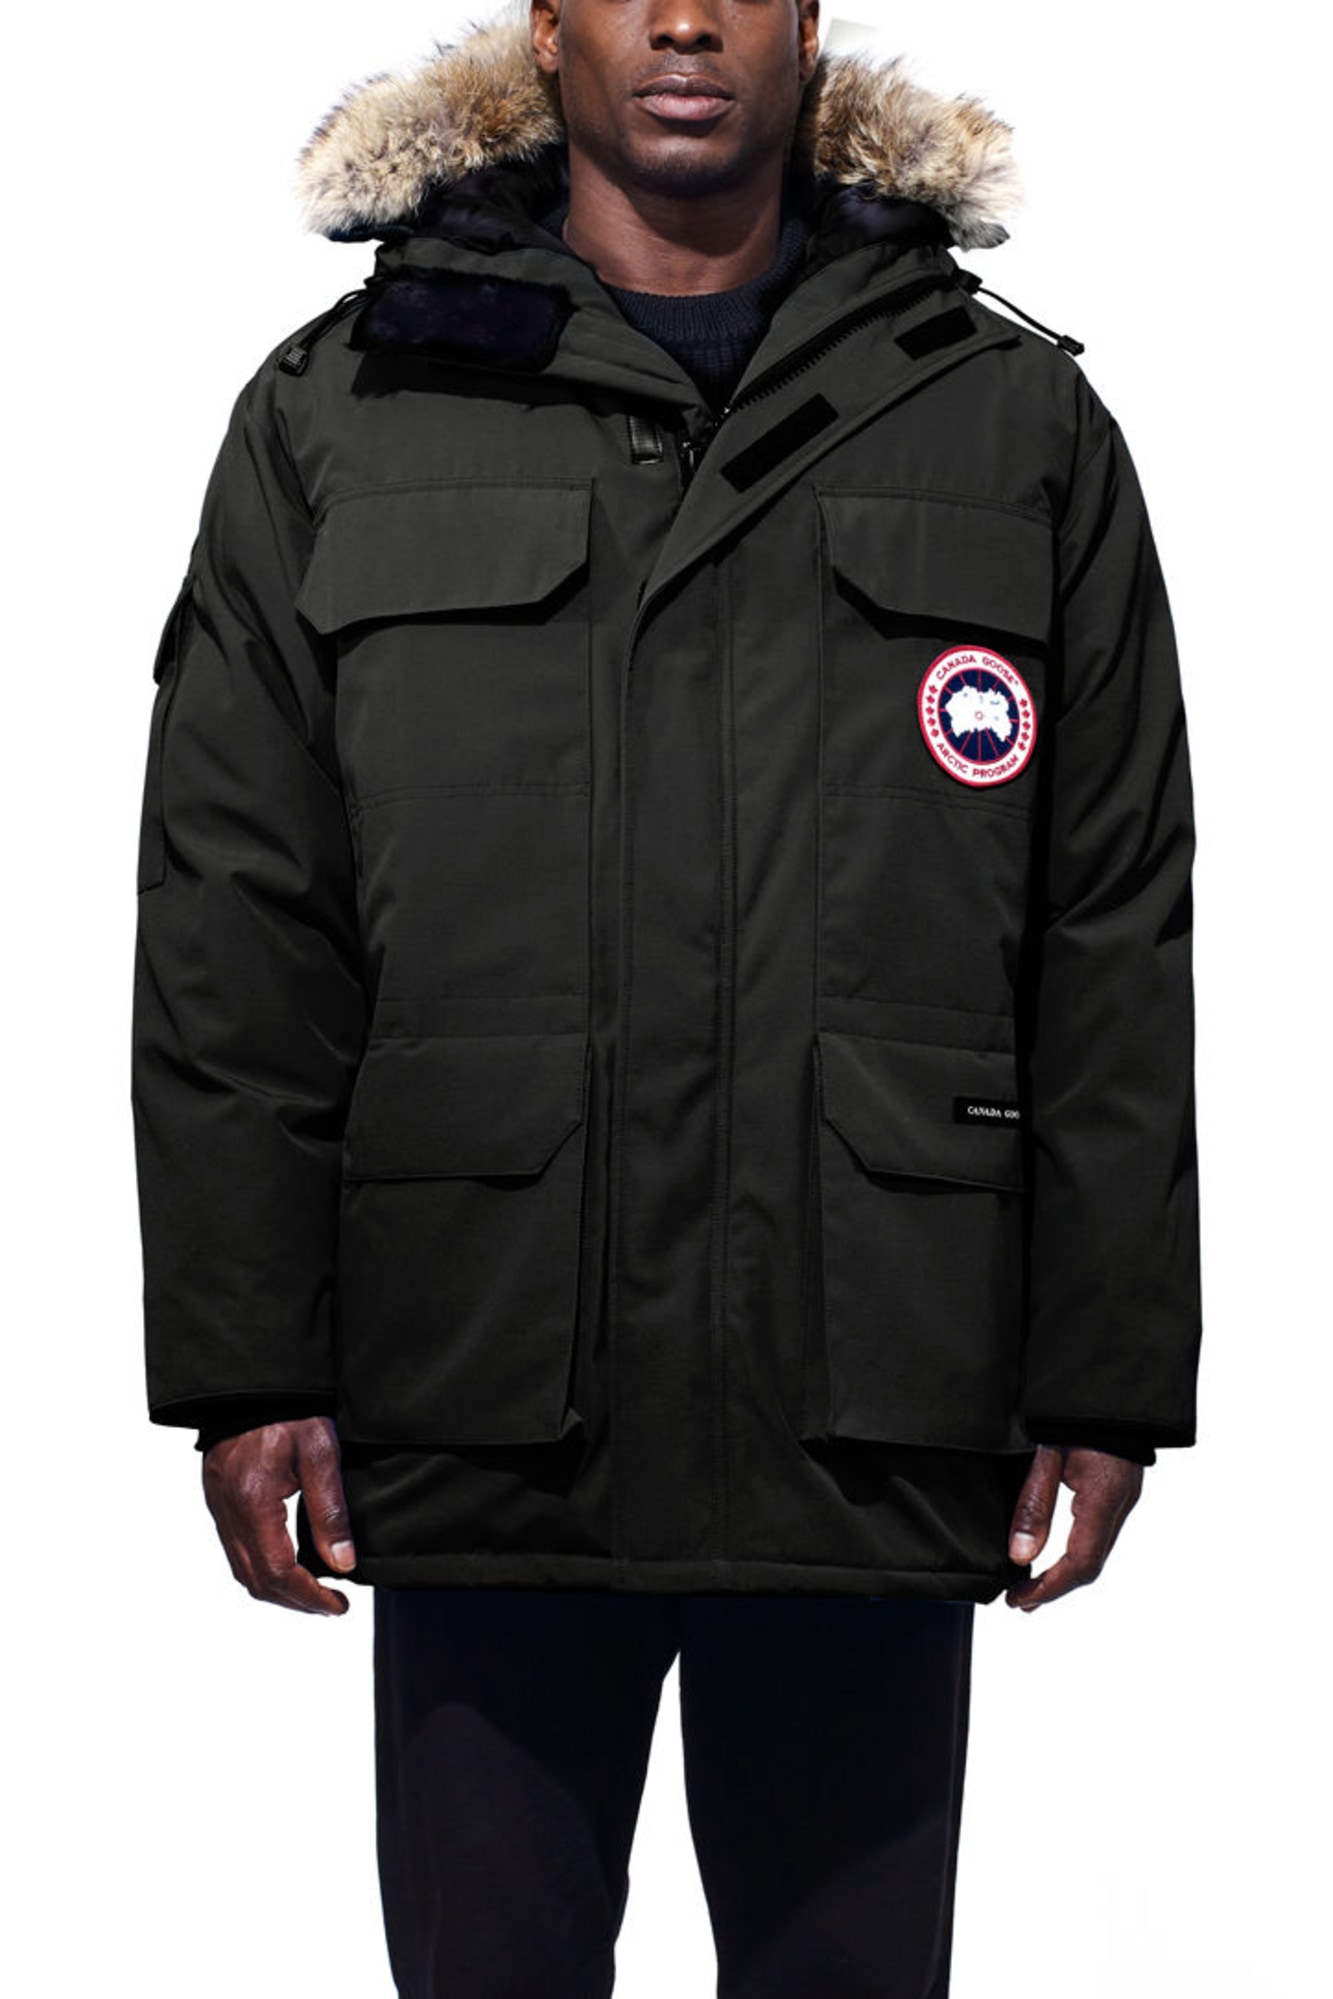 Canada Goose Special Edition Jackets Top Sellers, 54% OFF | www 